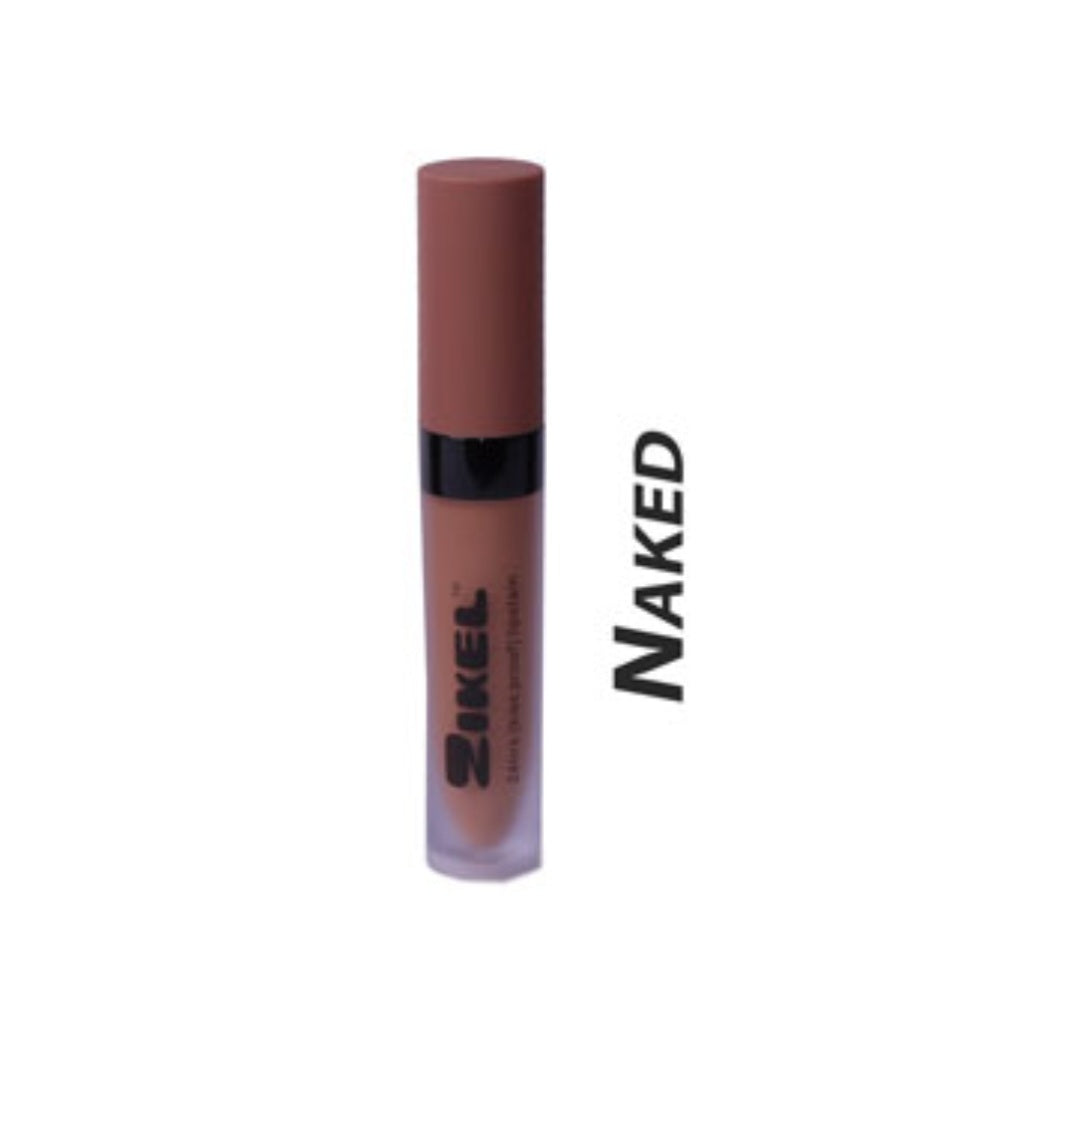 ZIKEL KISSPROOF Matte Lipstick~ Rossetto Opaco non trasferibile - SANDY'S MAKEUP AND ARTISTRY 